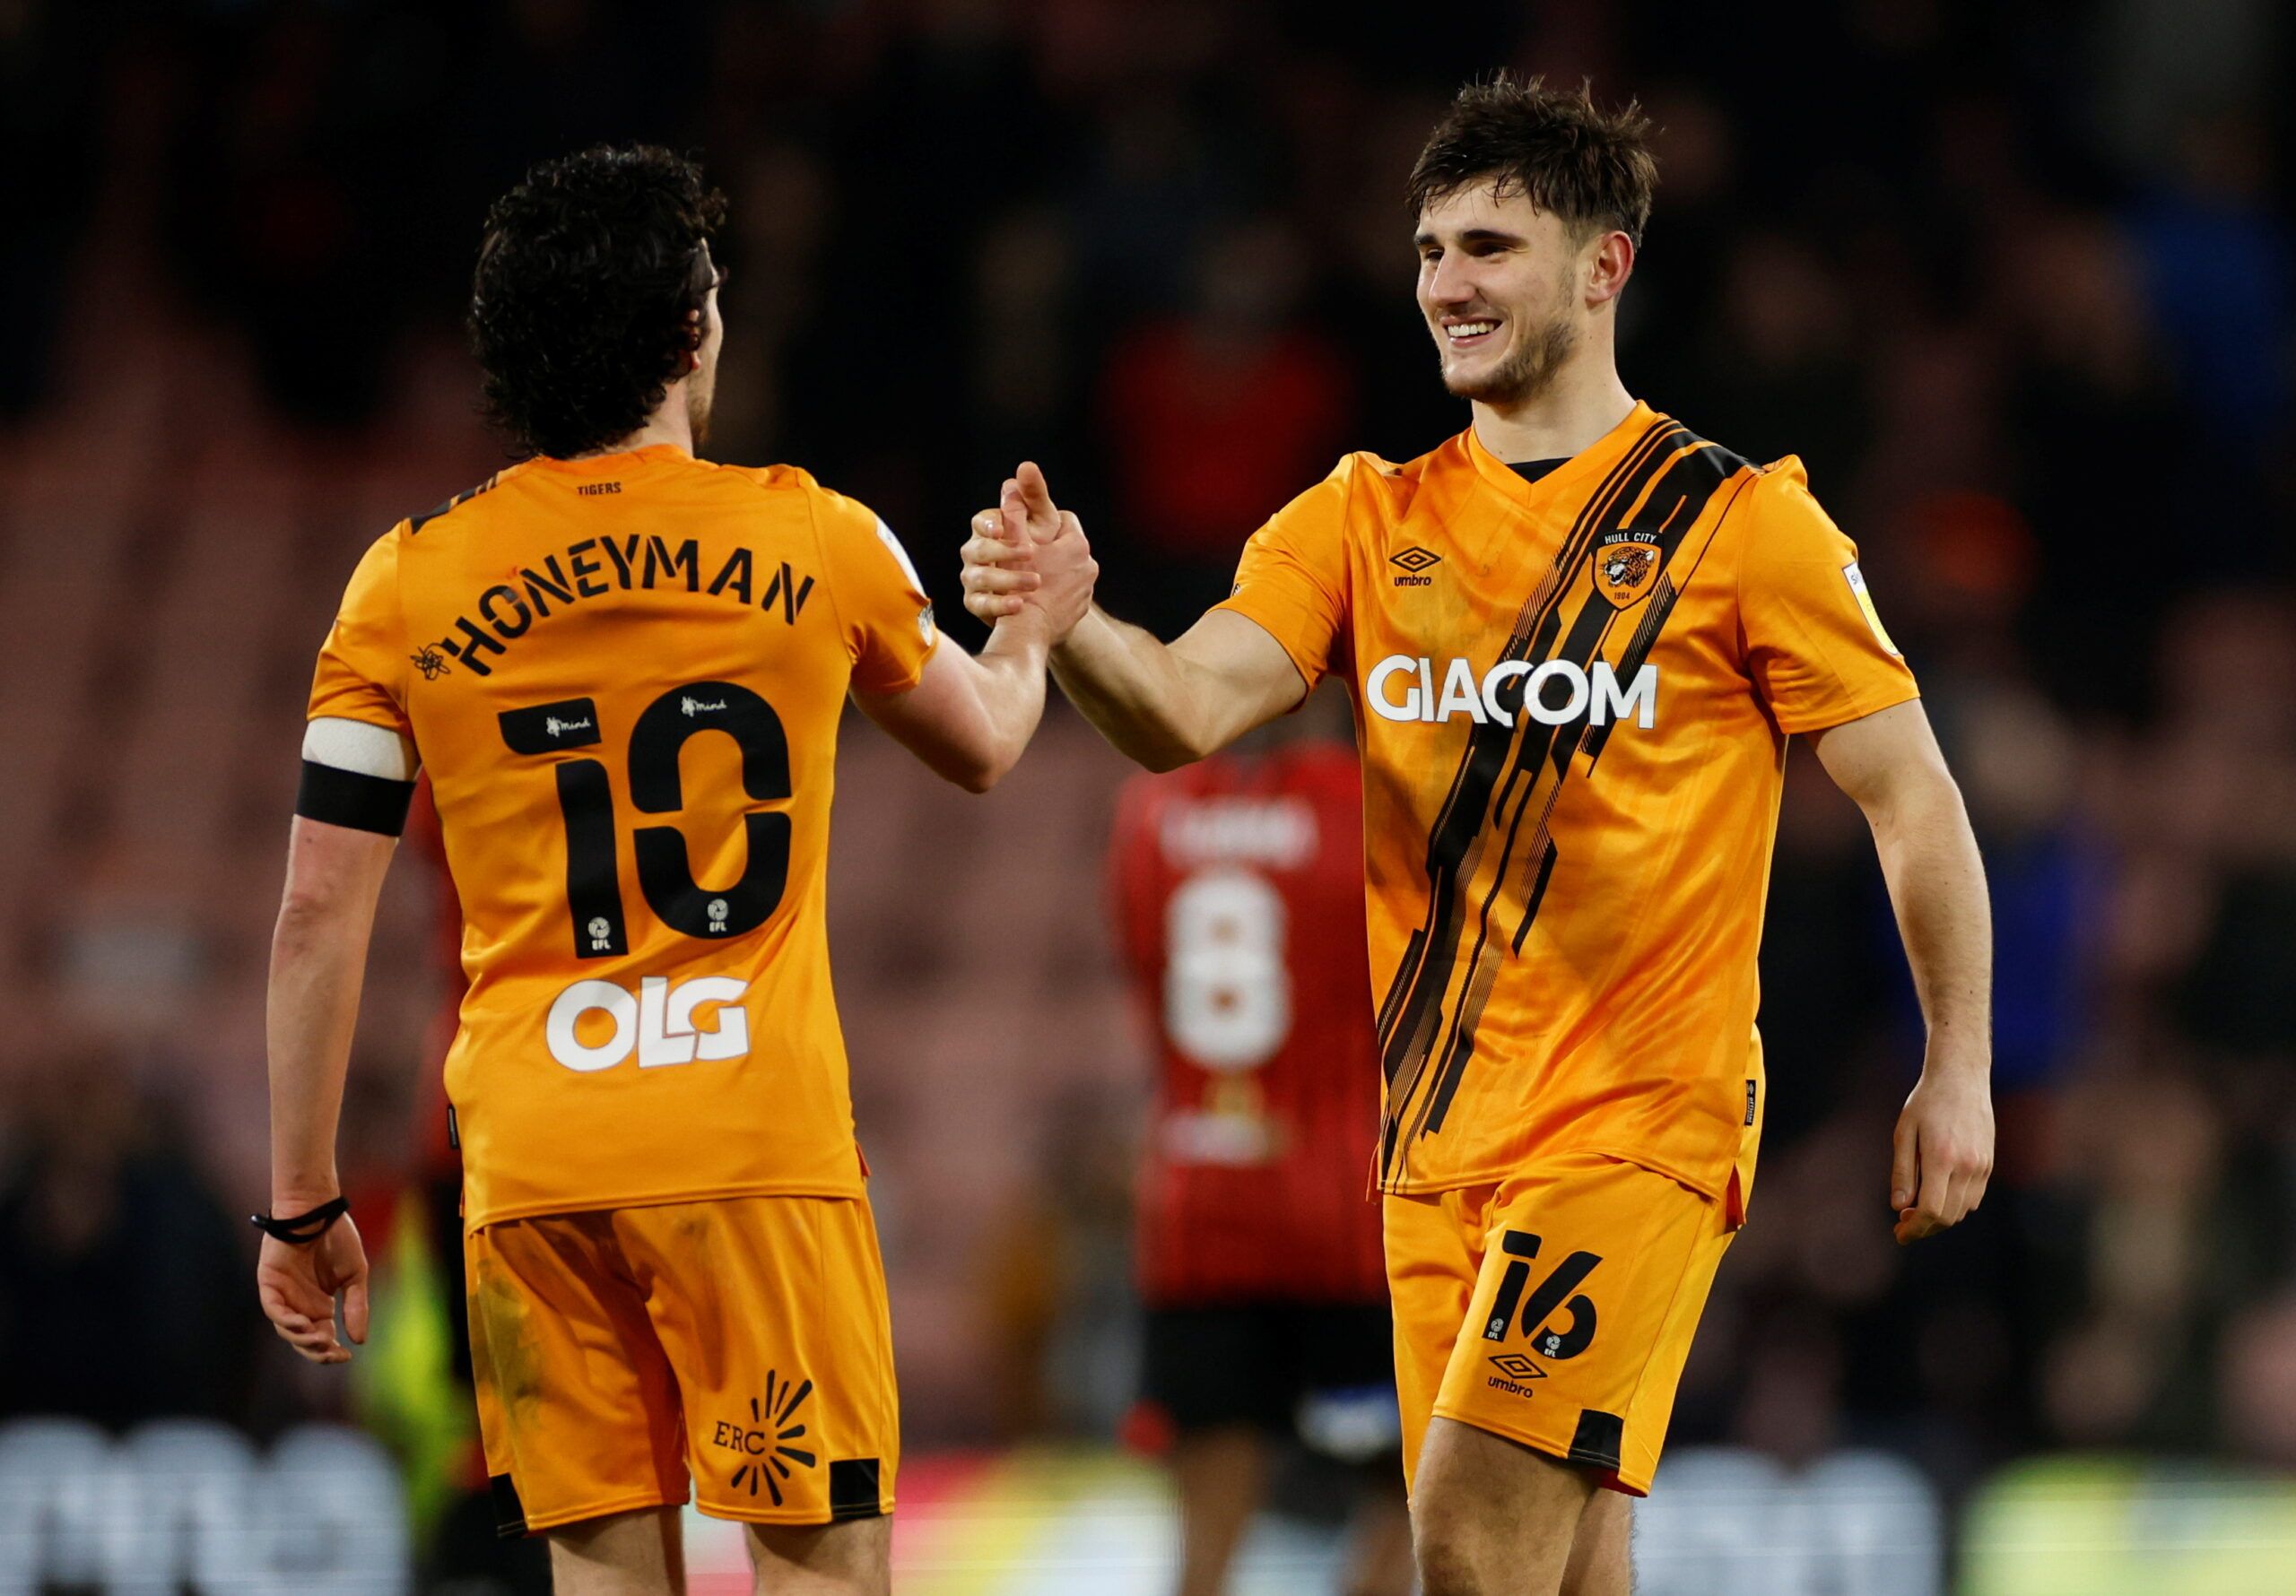 Soccer Football - Championship - AFC Bournemouth v Hull City - Vitality Stadium, Bournemouth, Britain - January 22, 2022 Hull City's Ryan Longman celebrates with George Honeyman after the match    Action Images/John Sibley  EDITORIAL USE ONLY. No use with unauthorized audio, video, data, fixture lists, club/league logos or 